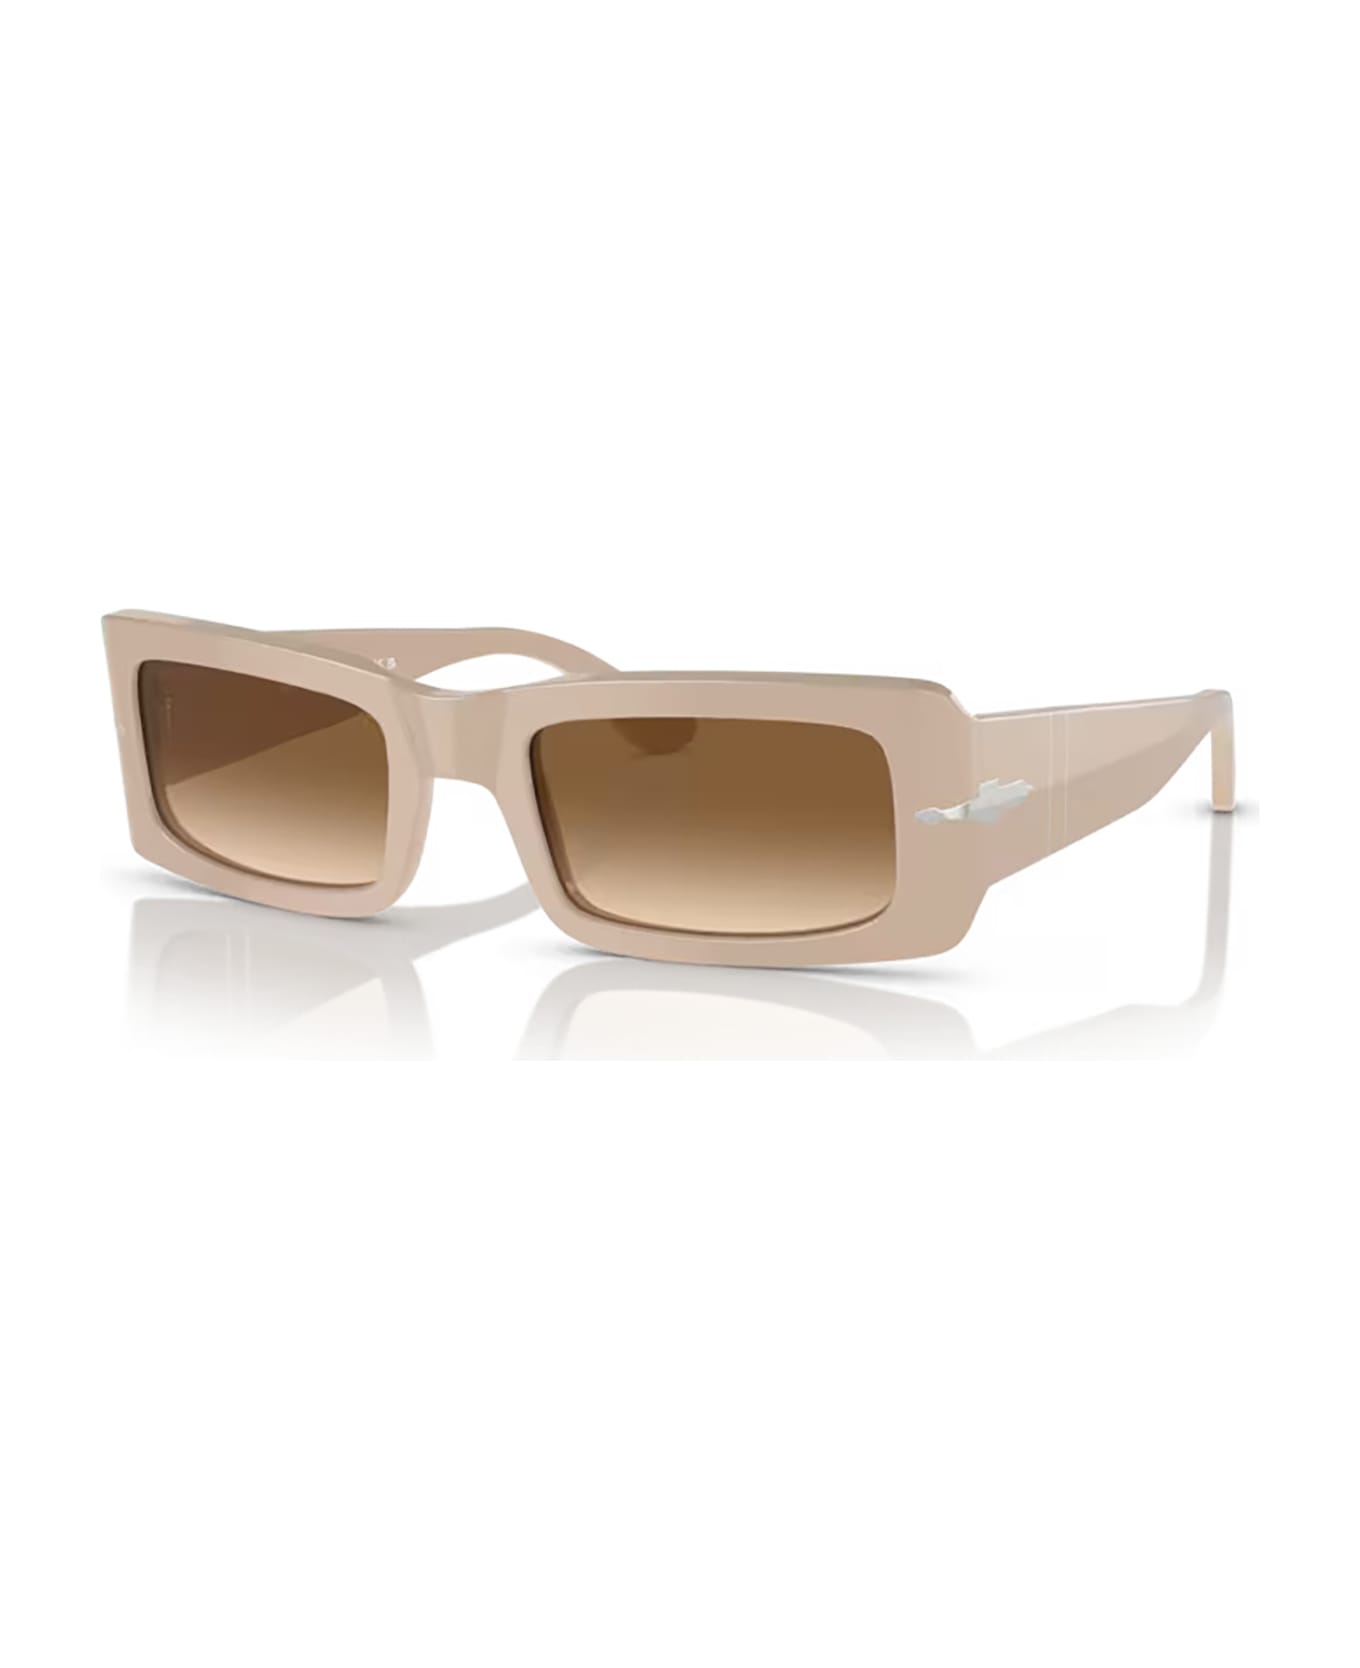 Persol Po3332s Solid Beige Sunglasses - Solid Beige